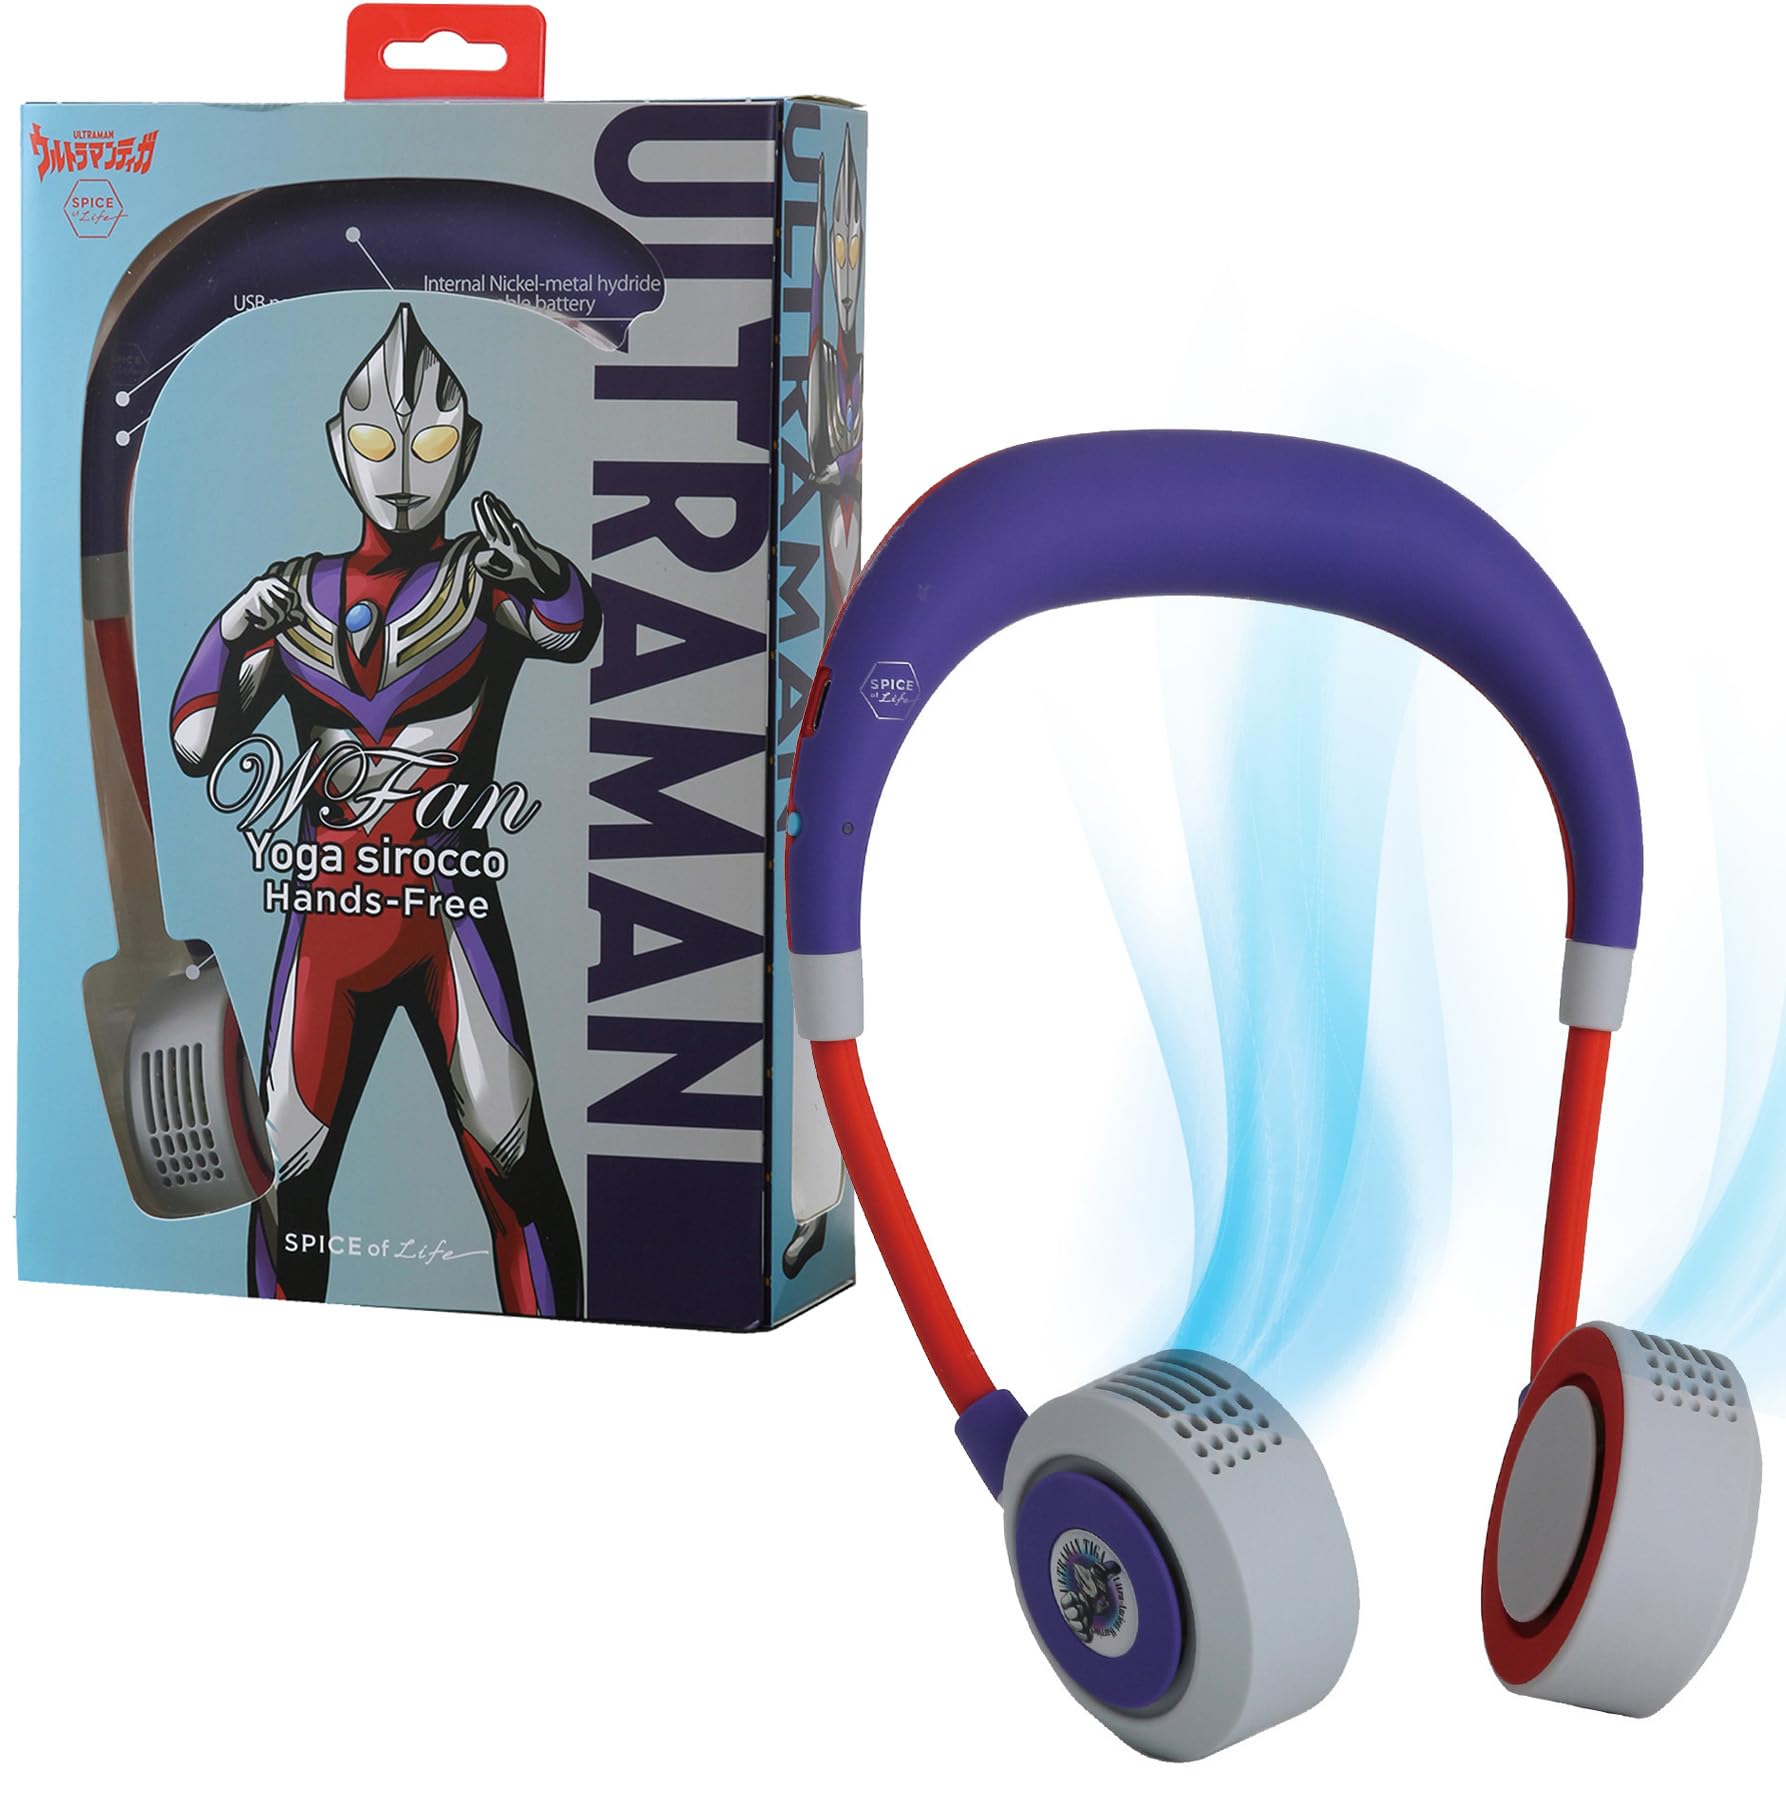  both hand . possible to use hands free neck .. electric fan WFan double fan yoga Sirocco Ultraman Tiga model official SPICE OF LIFE( spice )